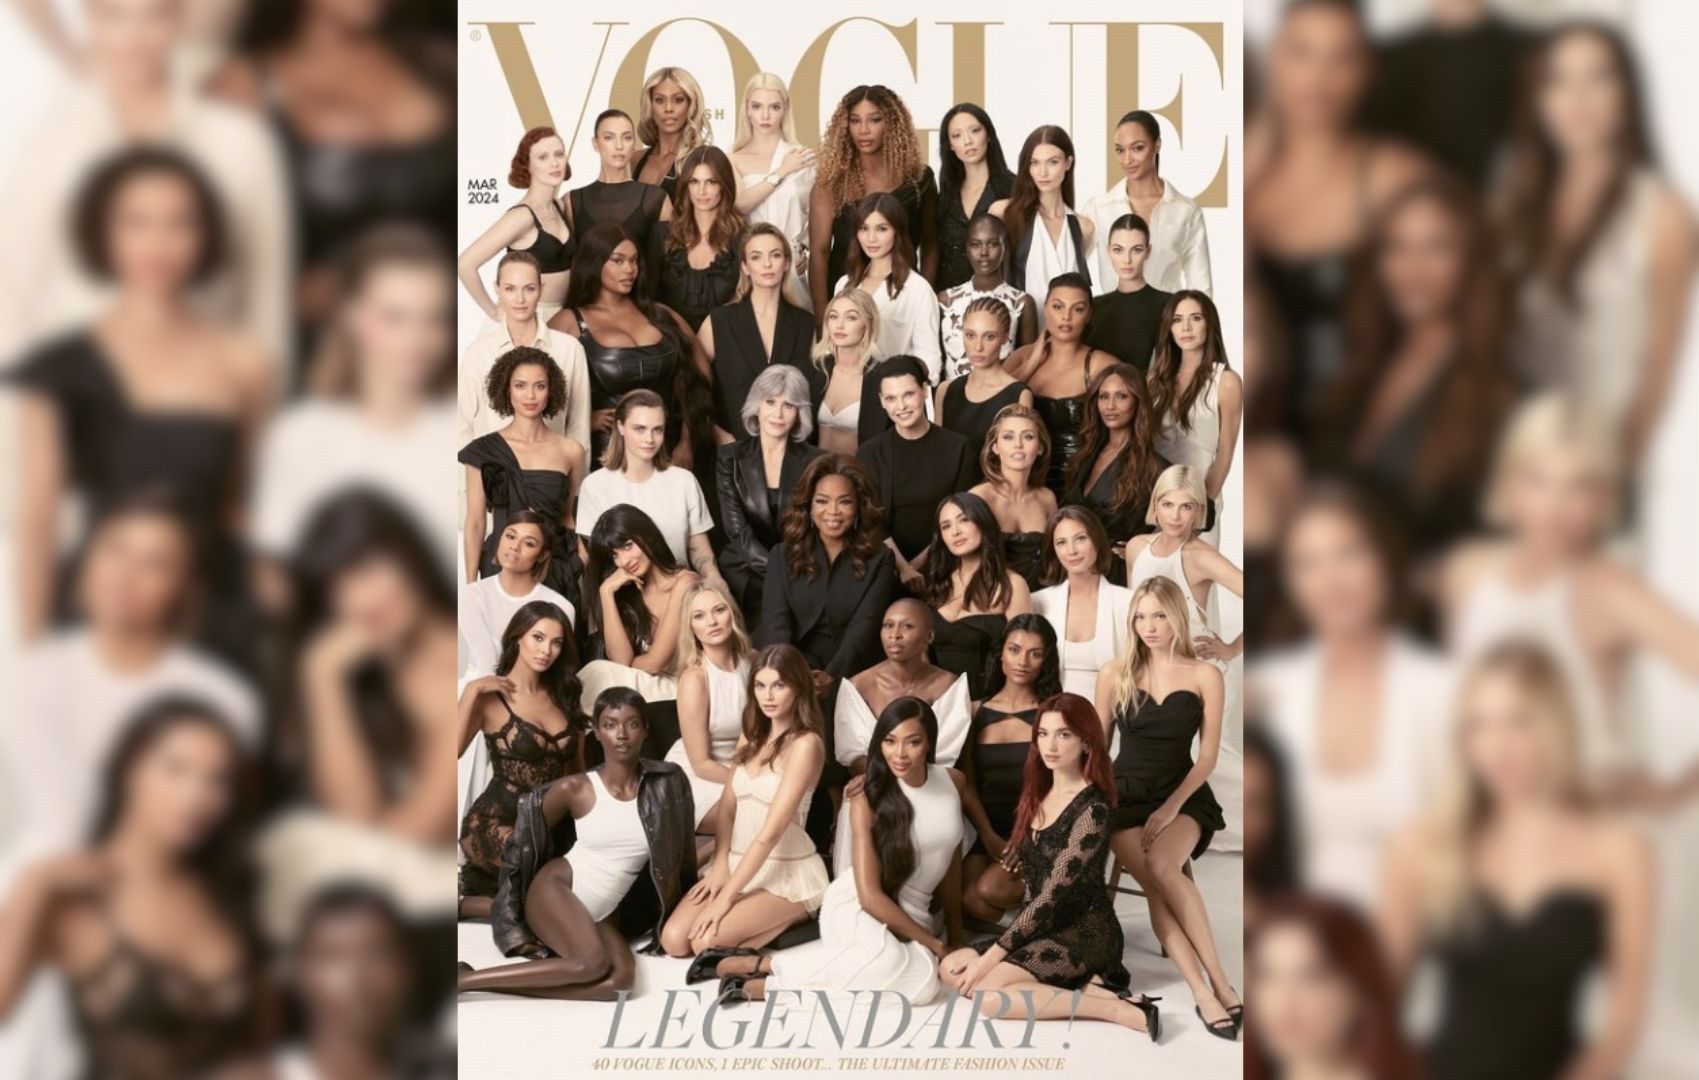 British Vogue taps 40 fashion icons for EIC's final cover